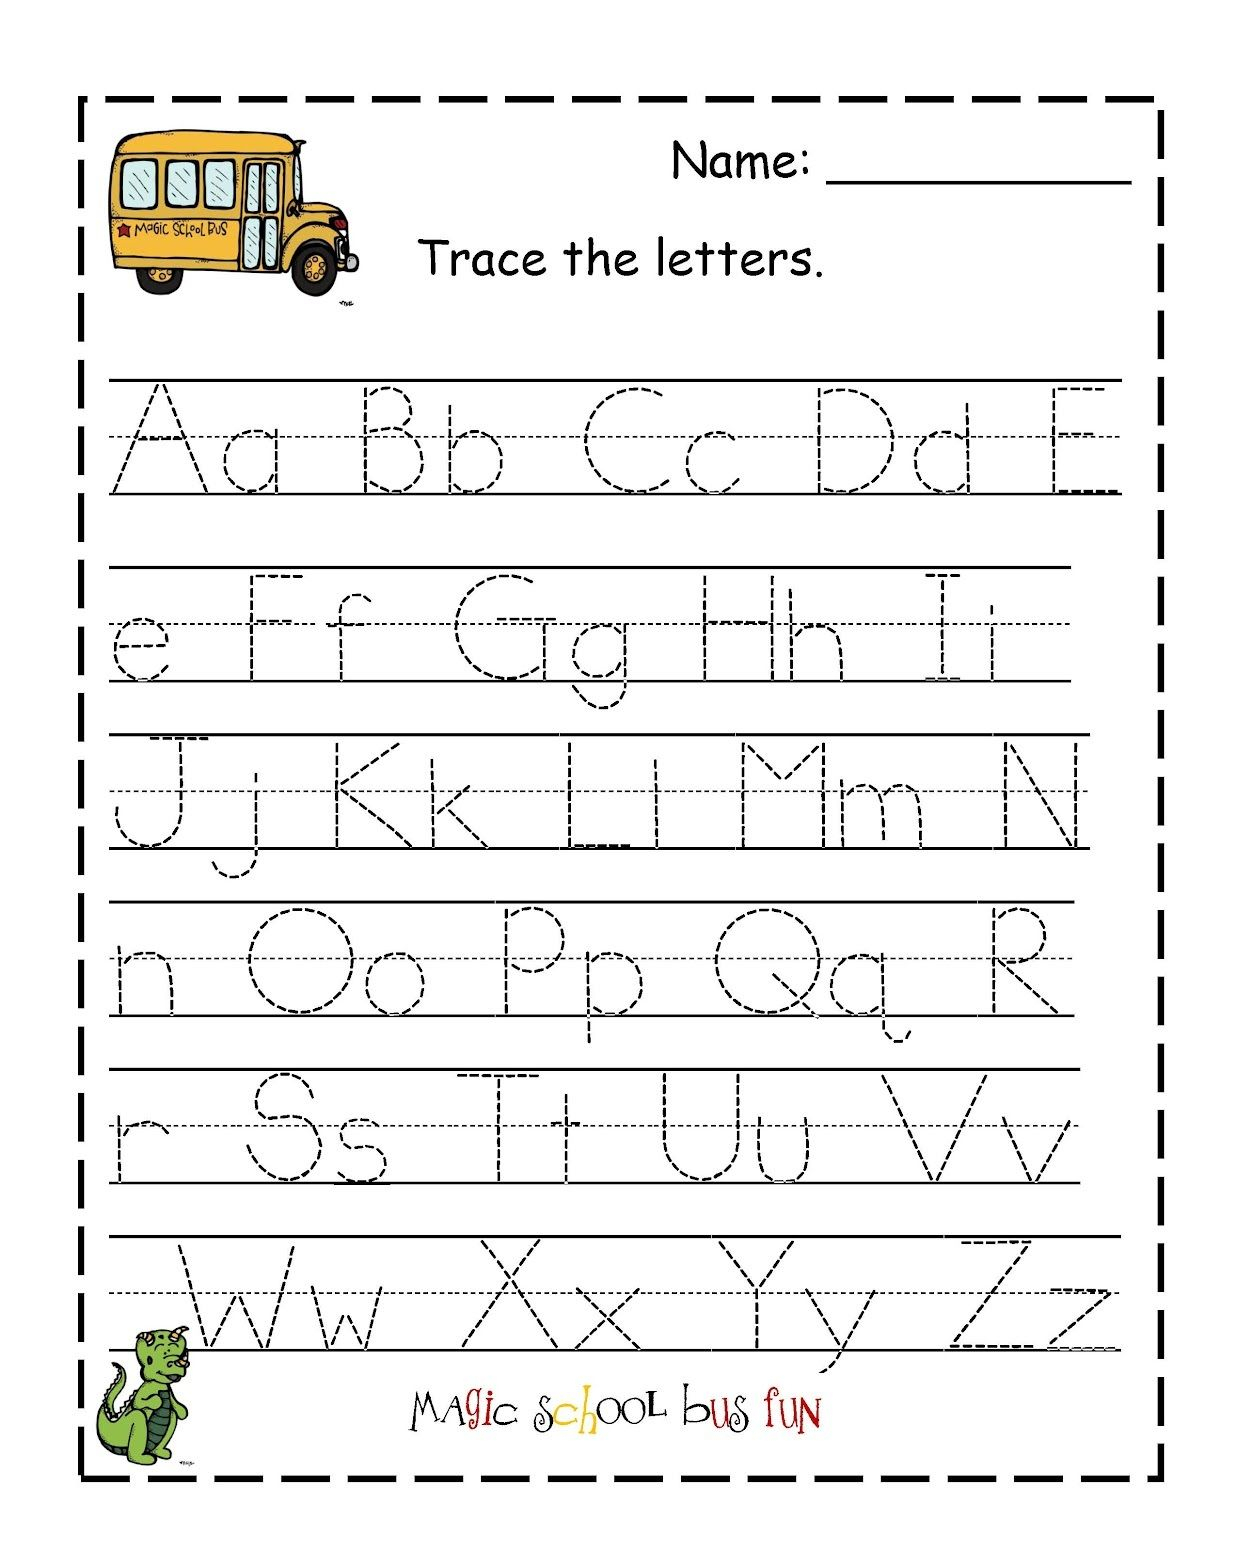 Traceable Letter Worksheets To Print | Arbeitsblätter Zum intended for Print Activities Tracing Letters Names